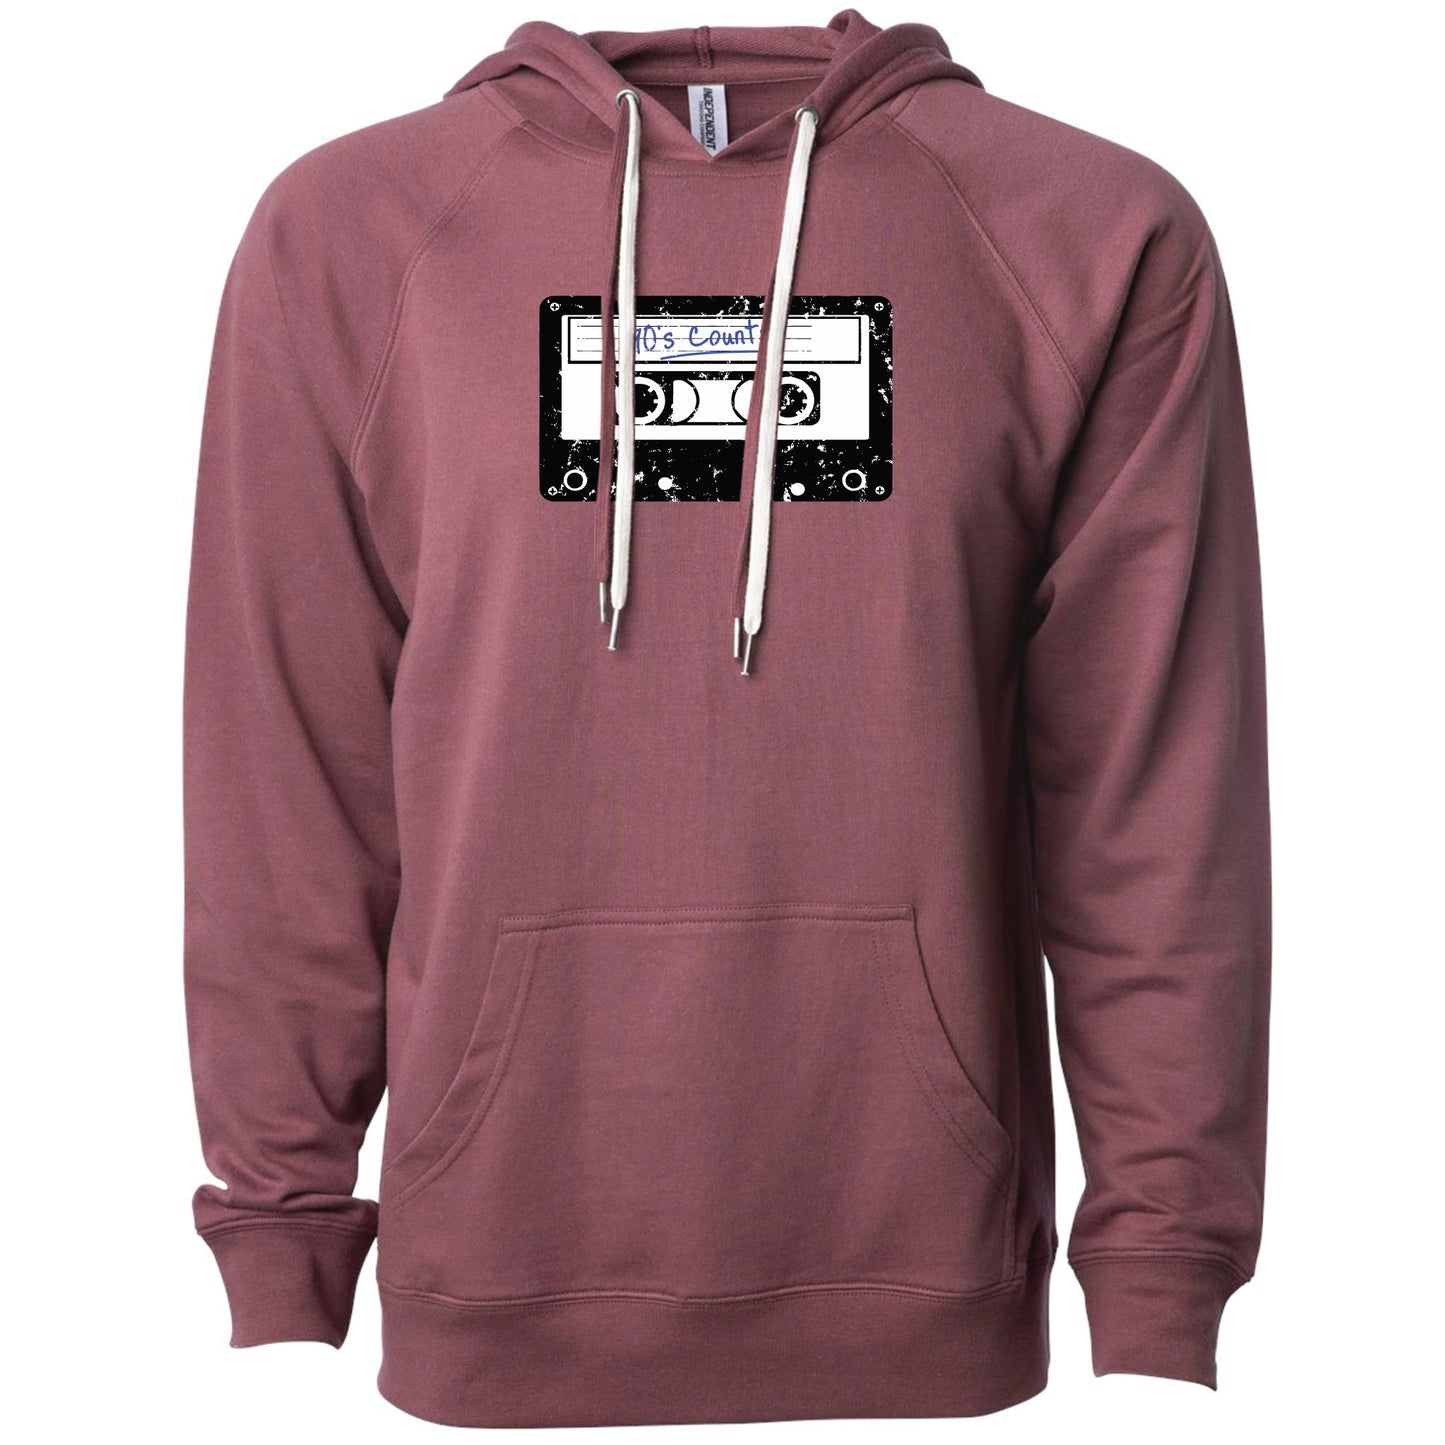 90s Country Cassette Lightweight Hoodie